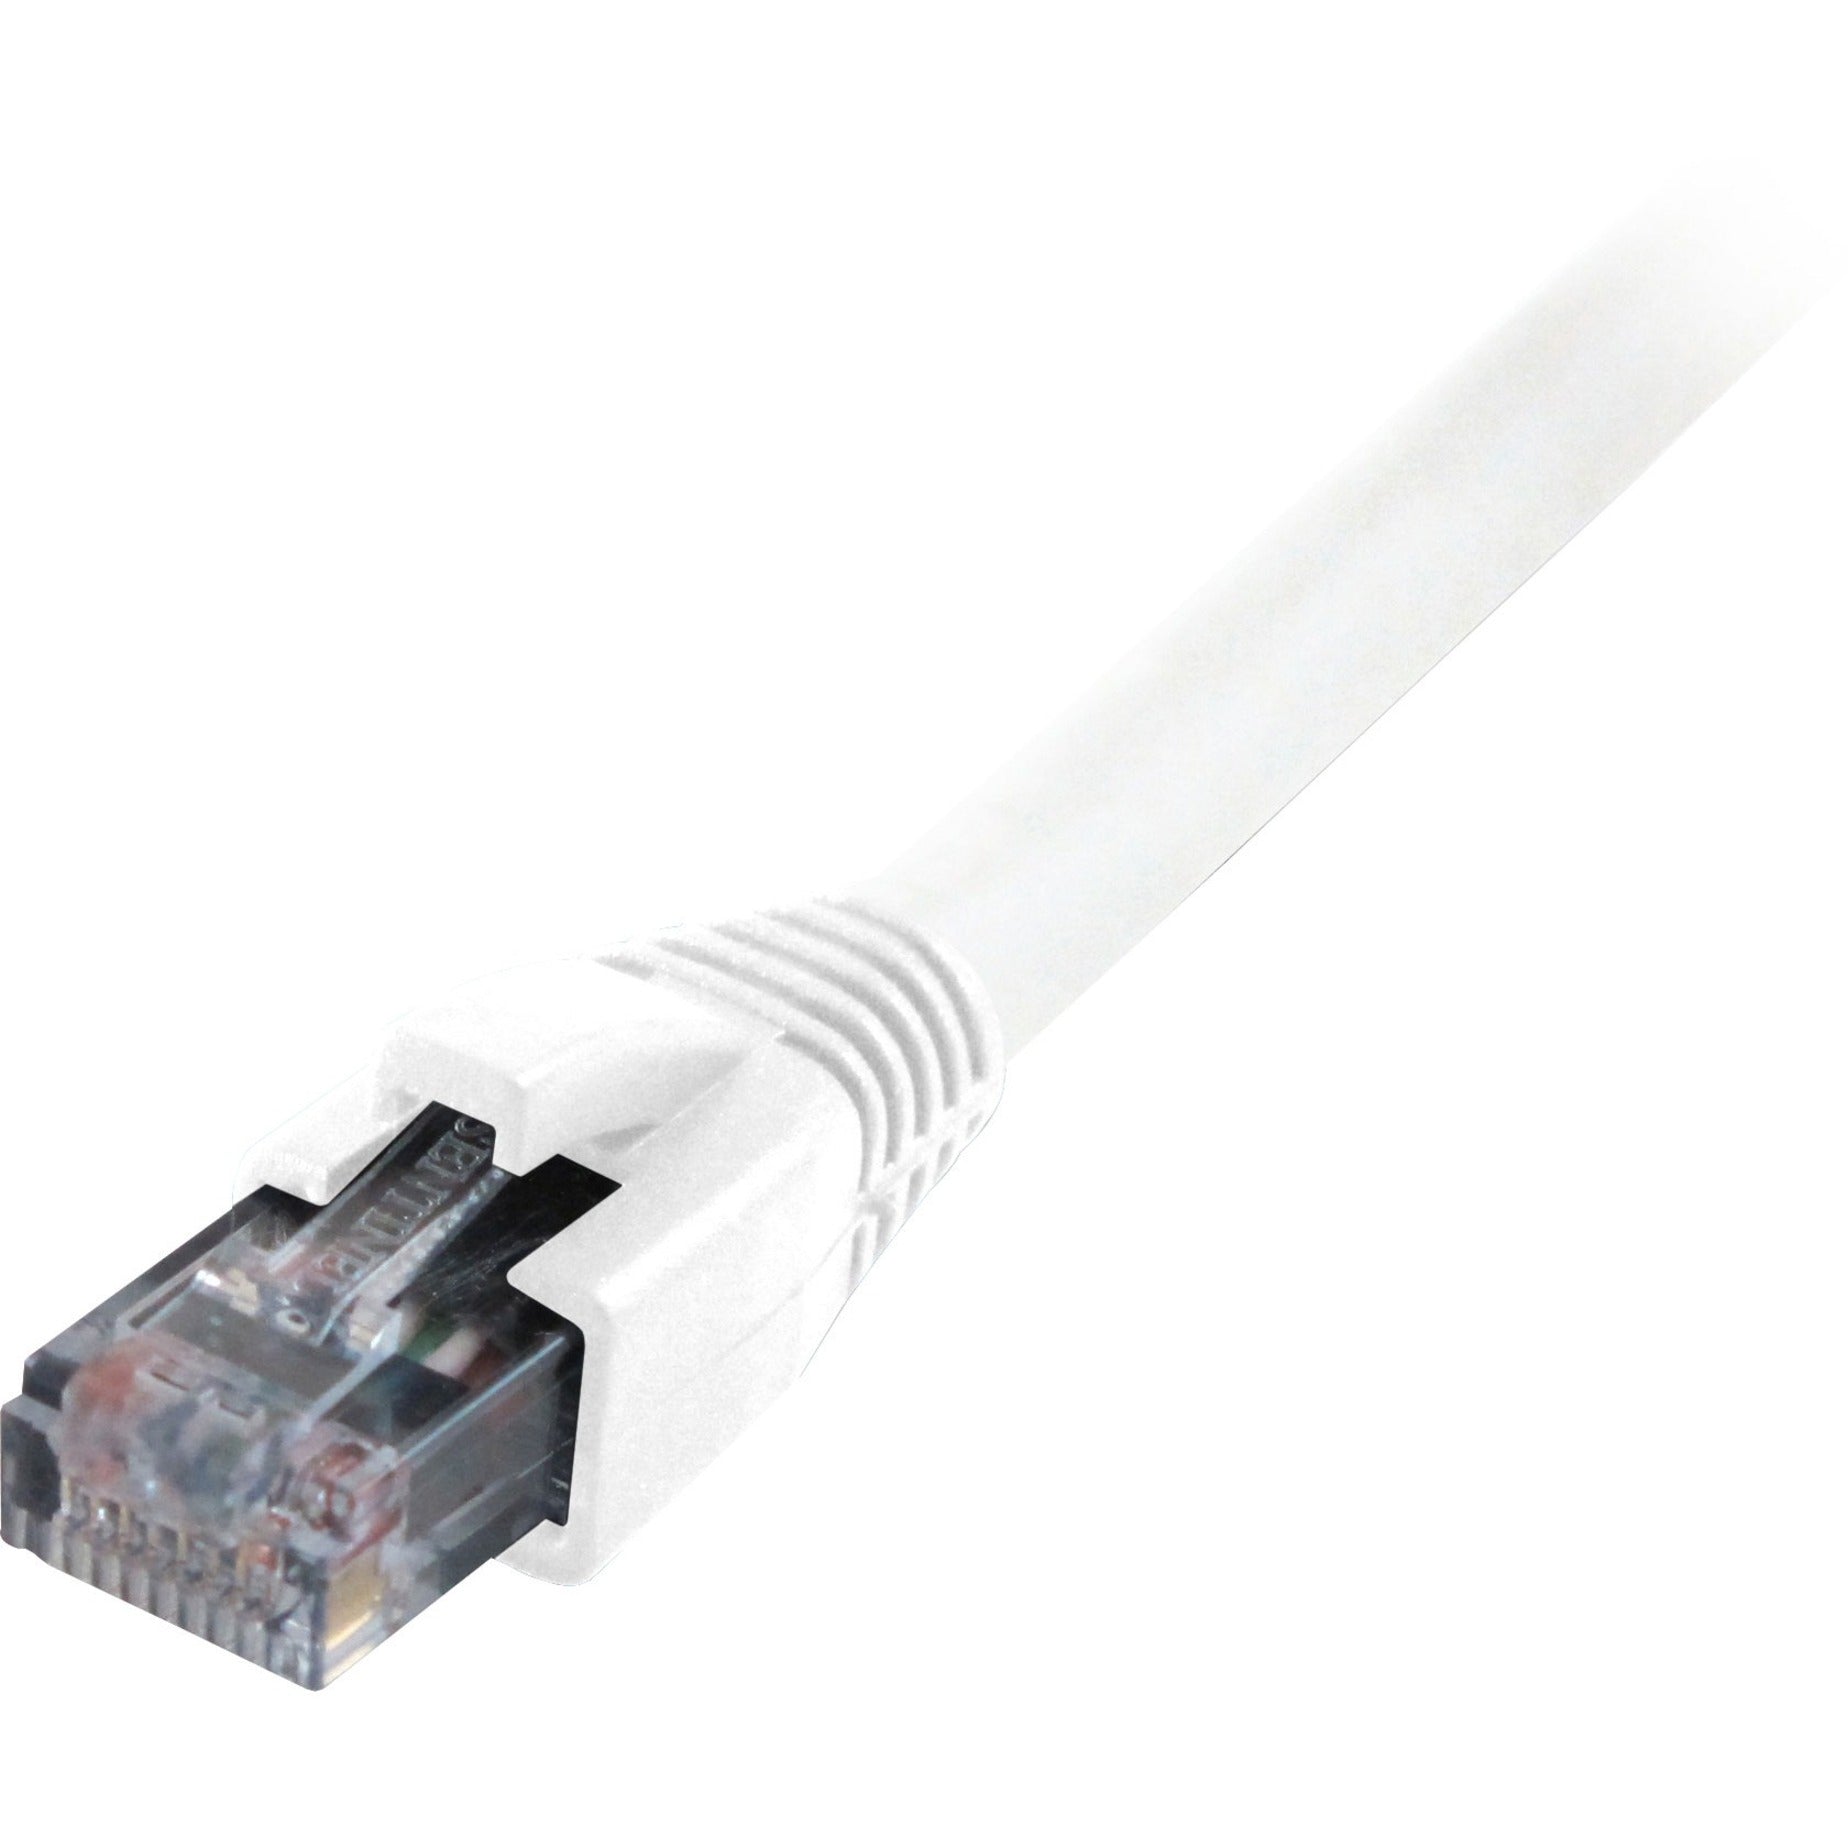 Comprehensive CAT6-100WHT Cat6 550 Mhz Snagless Patch Cable 100ft White, Molded, Strain Relief, Stranded, Booted, 1 Gbit/s Data Transfer Rate